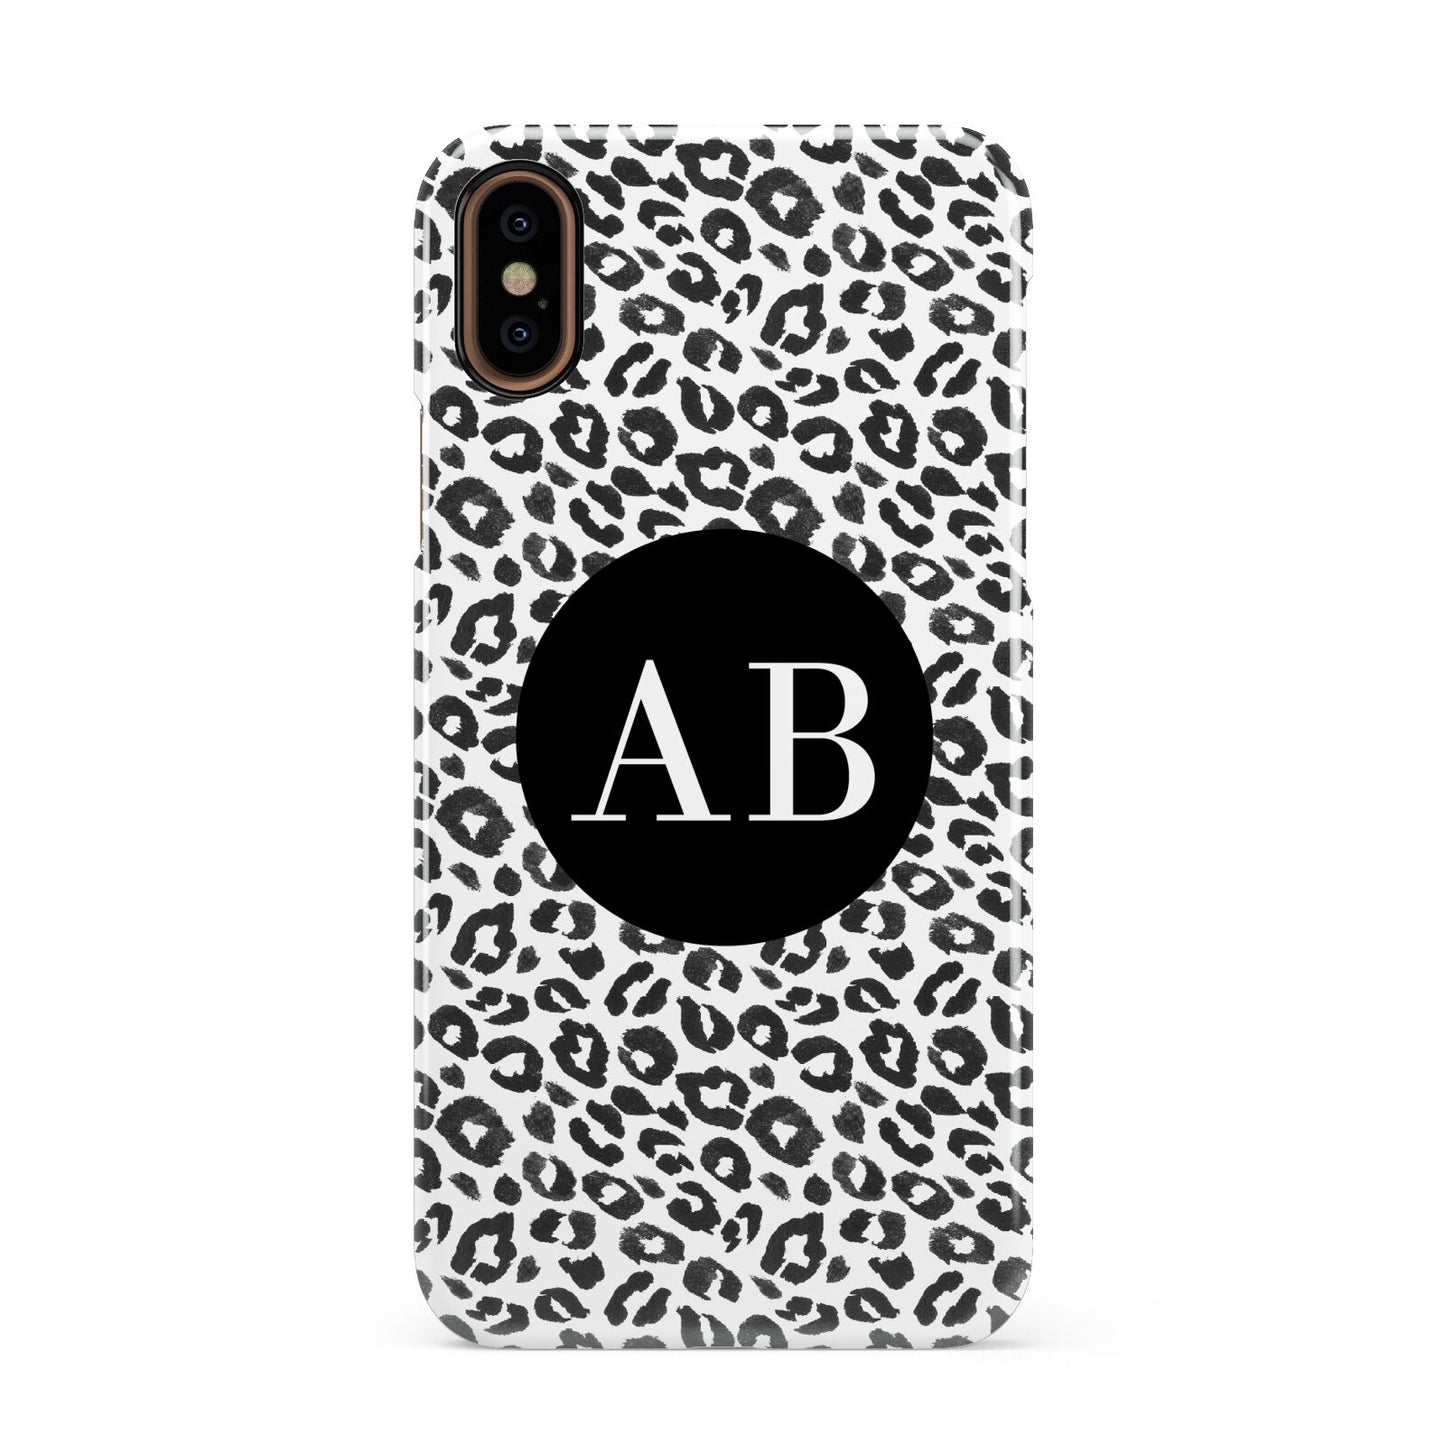 Leopard Print Black and White Apple iPhone XS 3D Snap Case